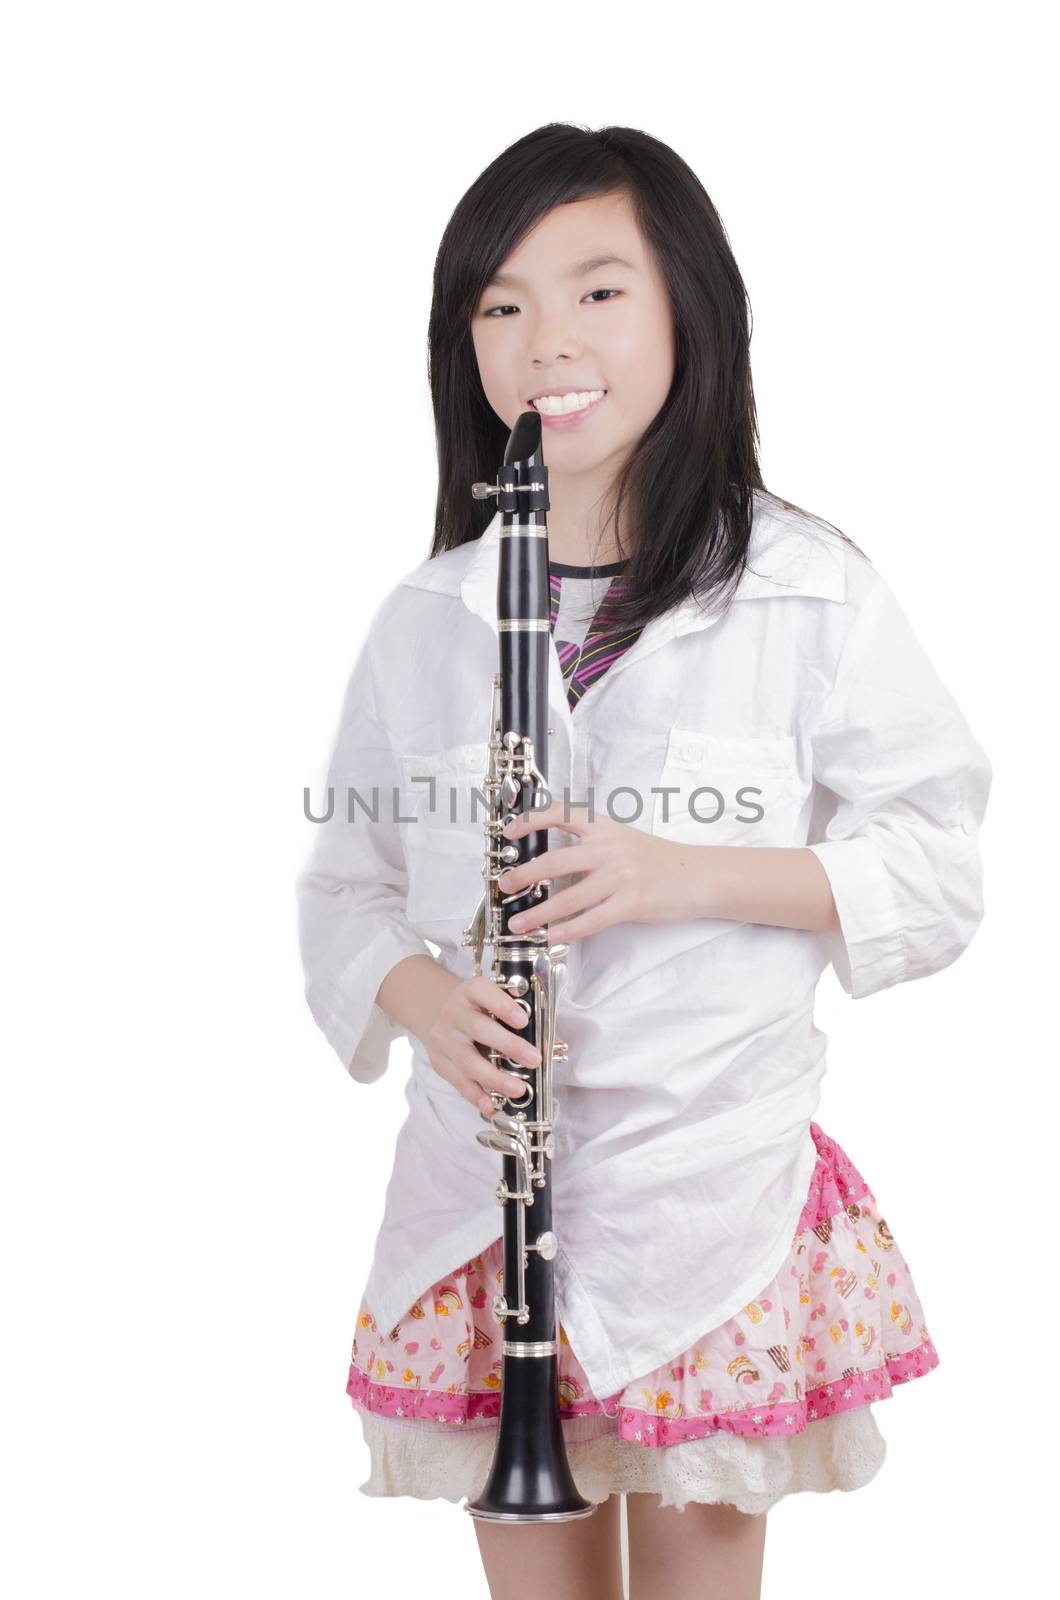 Beauty girl blowing instrument on white background